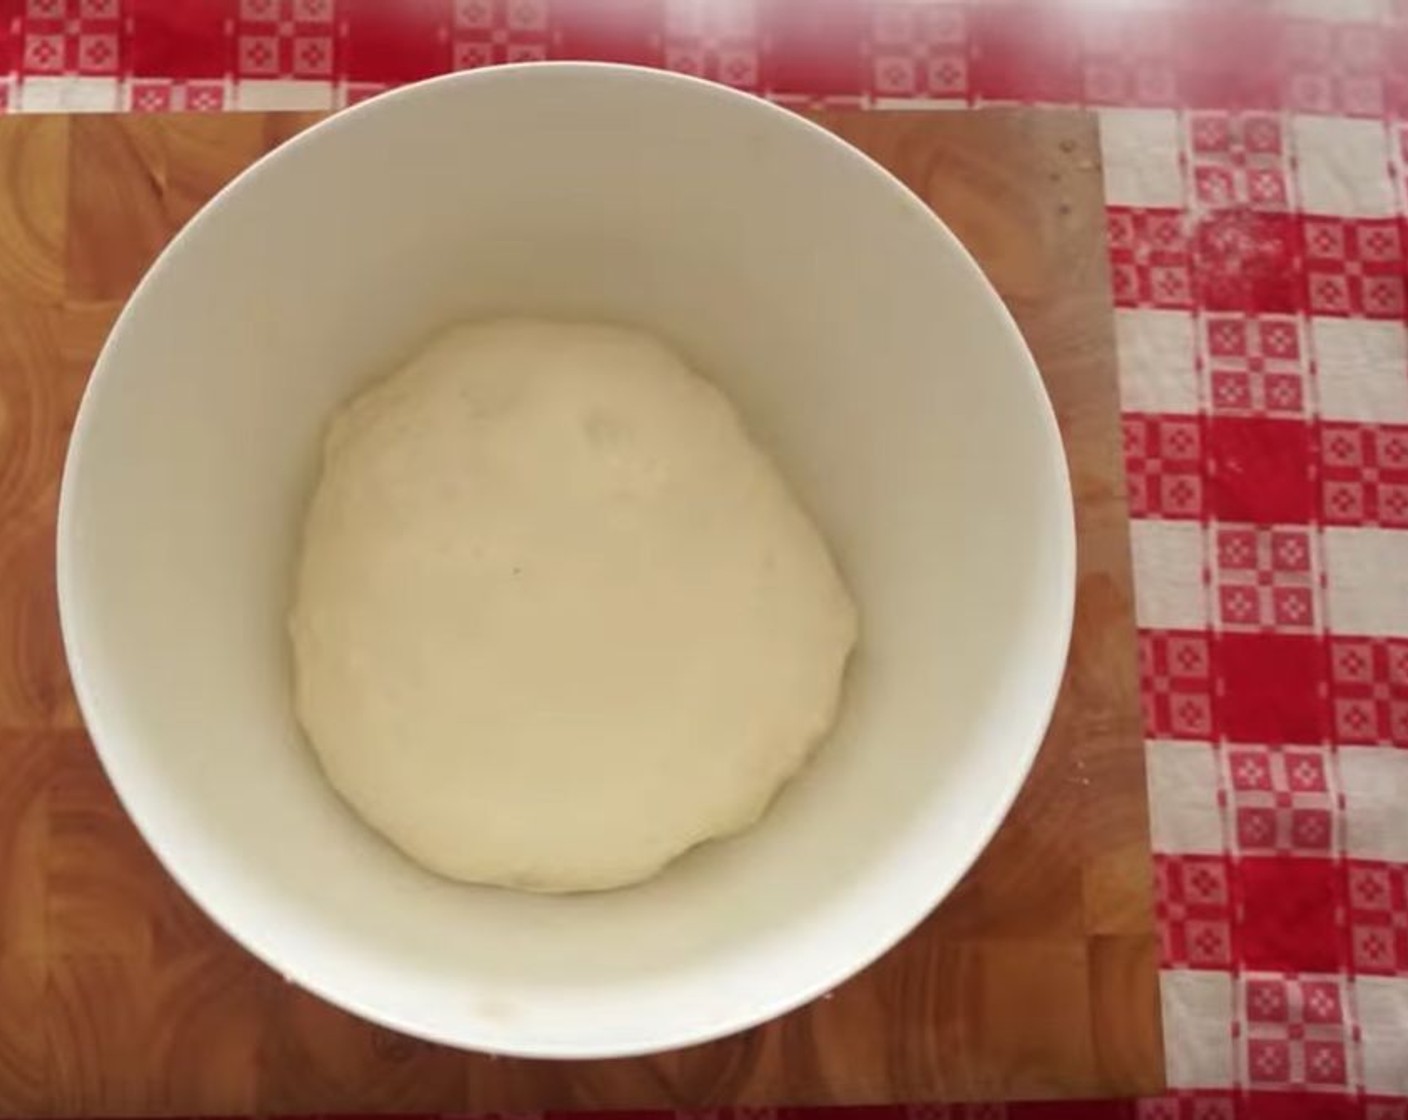 step 4 Prepare a mixing bowl by drizzling some Extra-Virgin Olive Oil (as needed) in it and basting it around the sides, then place the ball of pizza dough inside. Using your hands, knead the dough inside the bowl, covering it with the oil and forming a round ball.